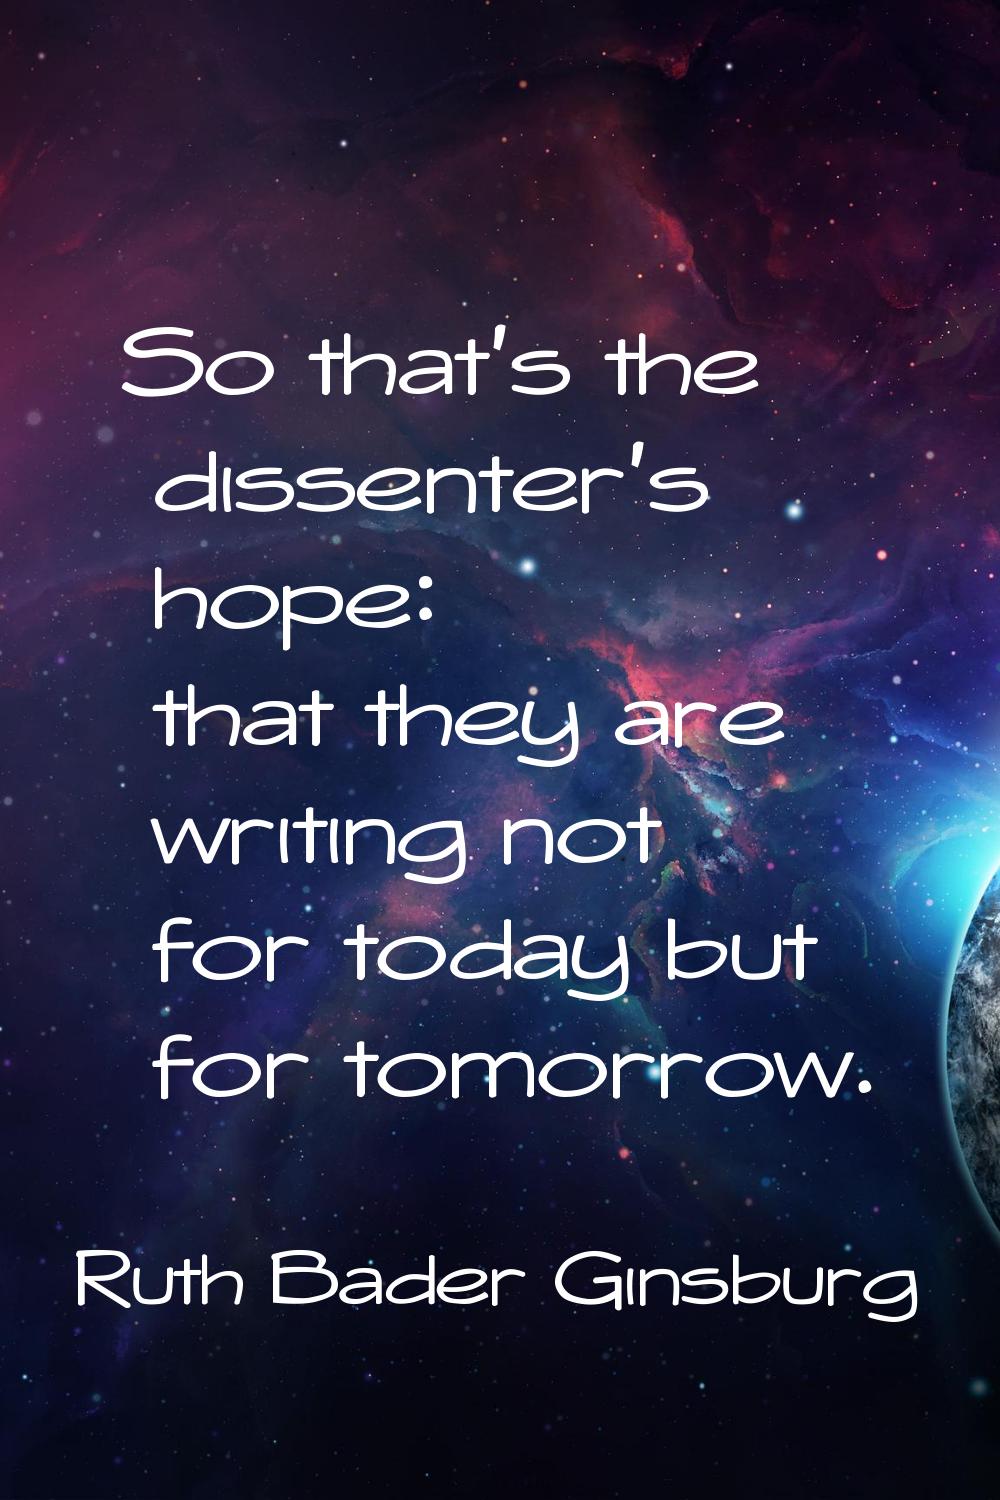 So that's the dissenter's hope: that they are writing not for today but for tomorrow.